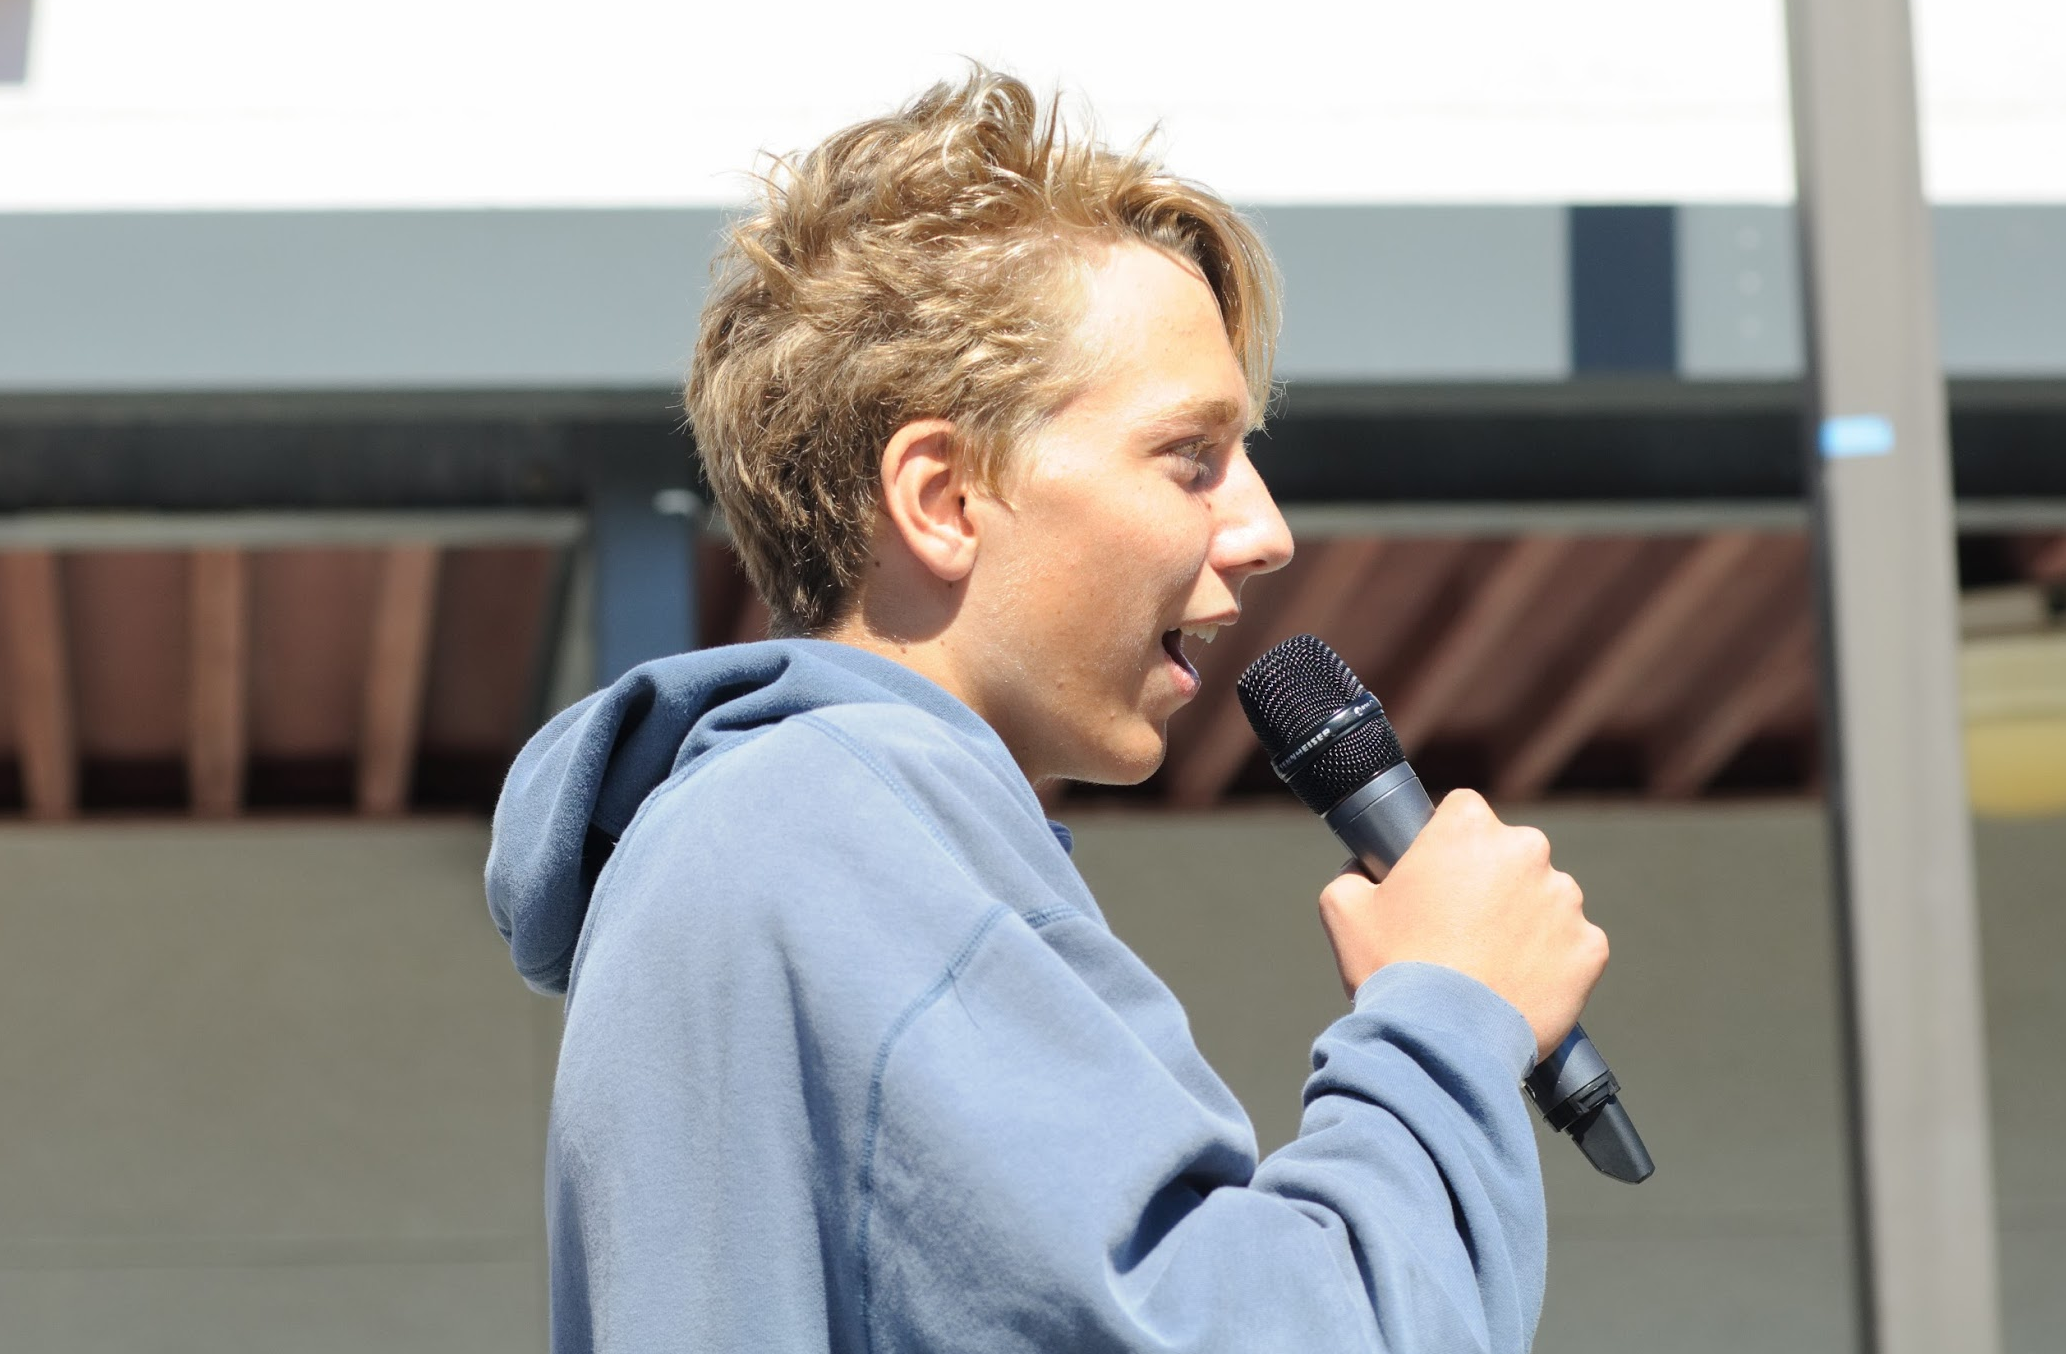 Joe Shoemaker ‘21 shares his thoughts on the activity. Credit: Muriel Rowley / The Foothill Dragon Press